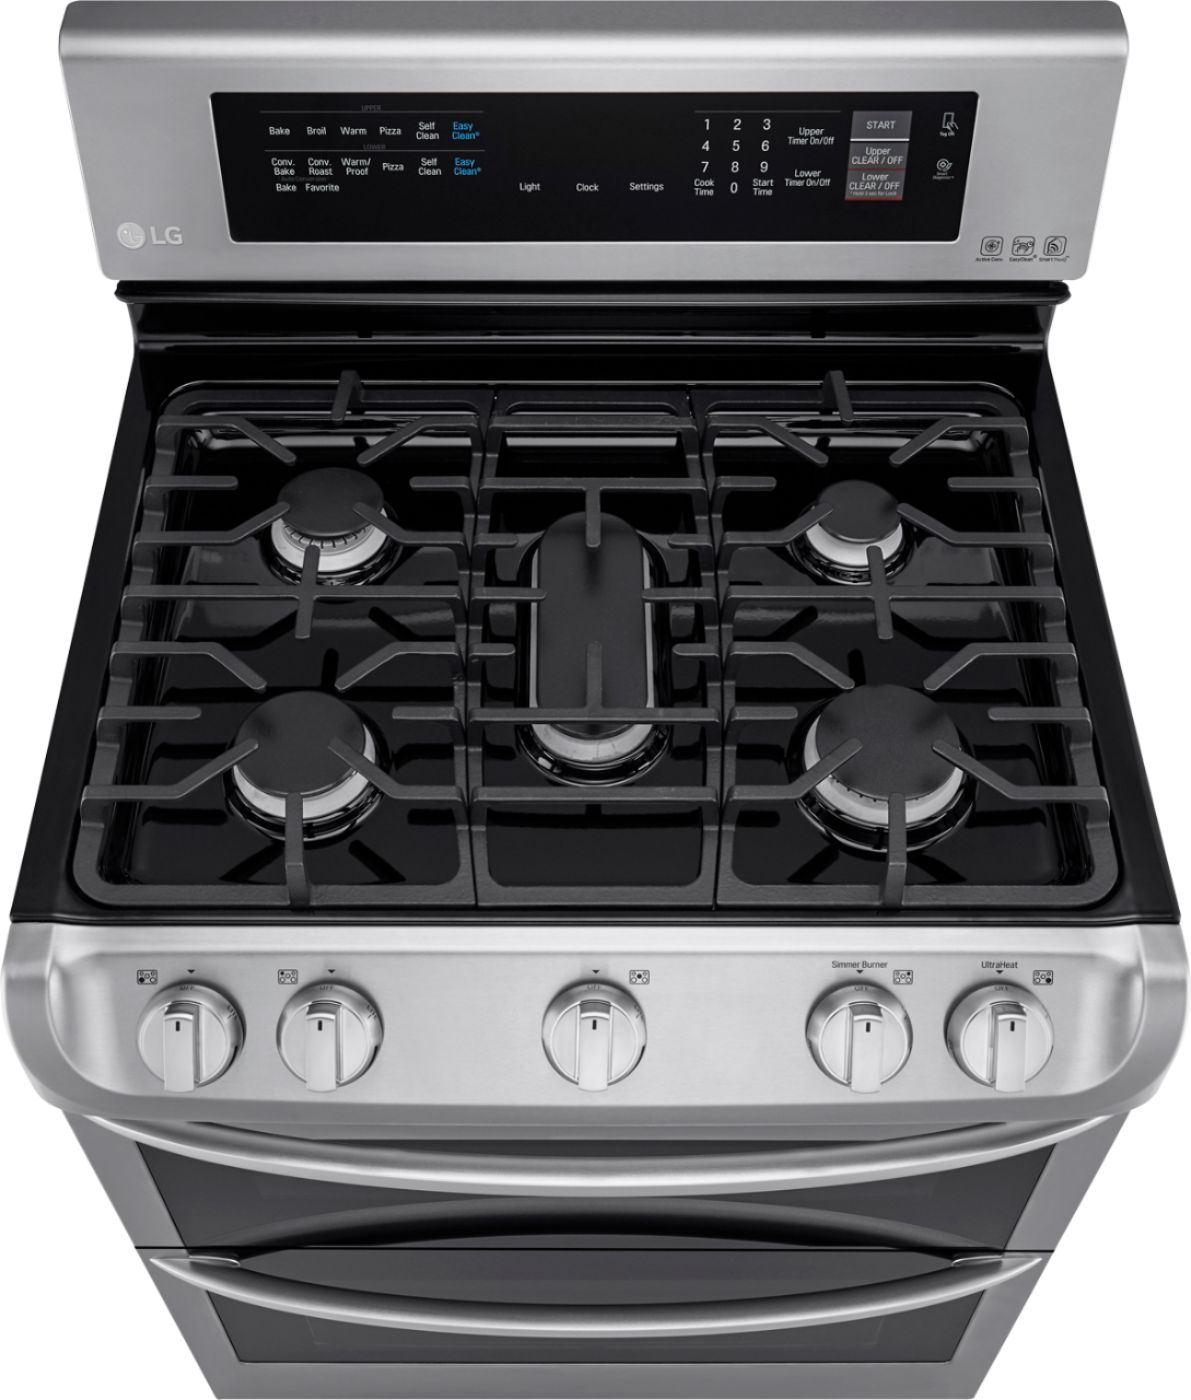 LG LDG4313ST 6.9 Cu. Ft. Stainless Double Oven Gas Range 